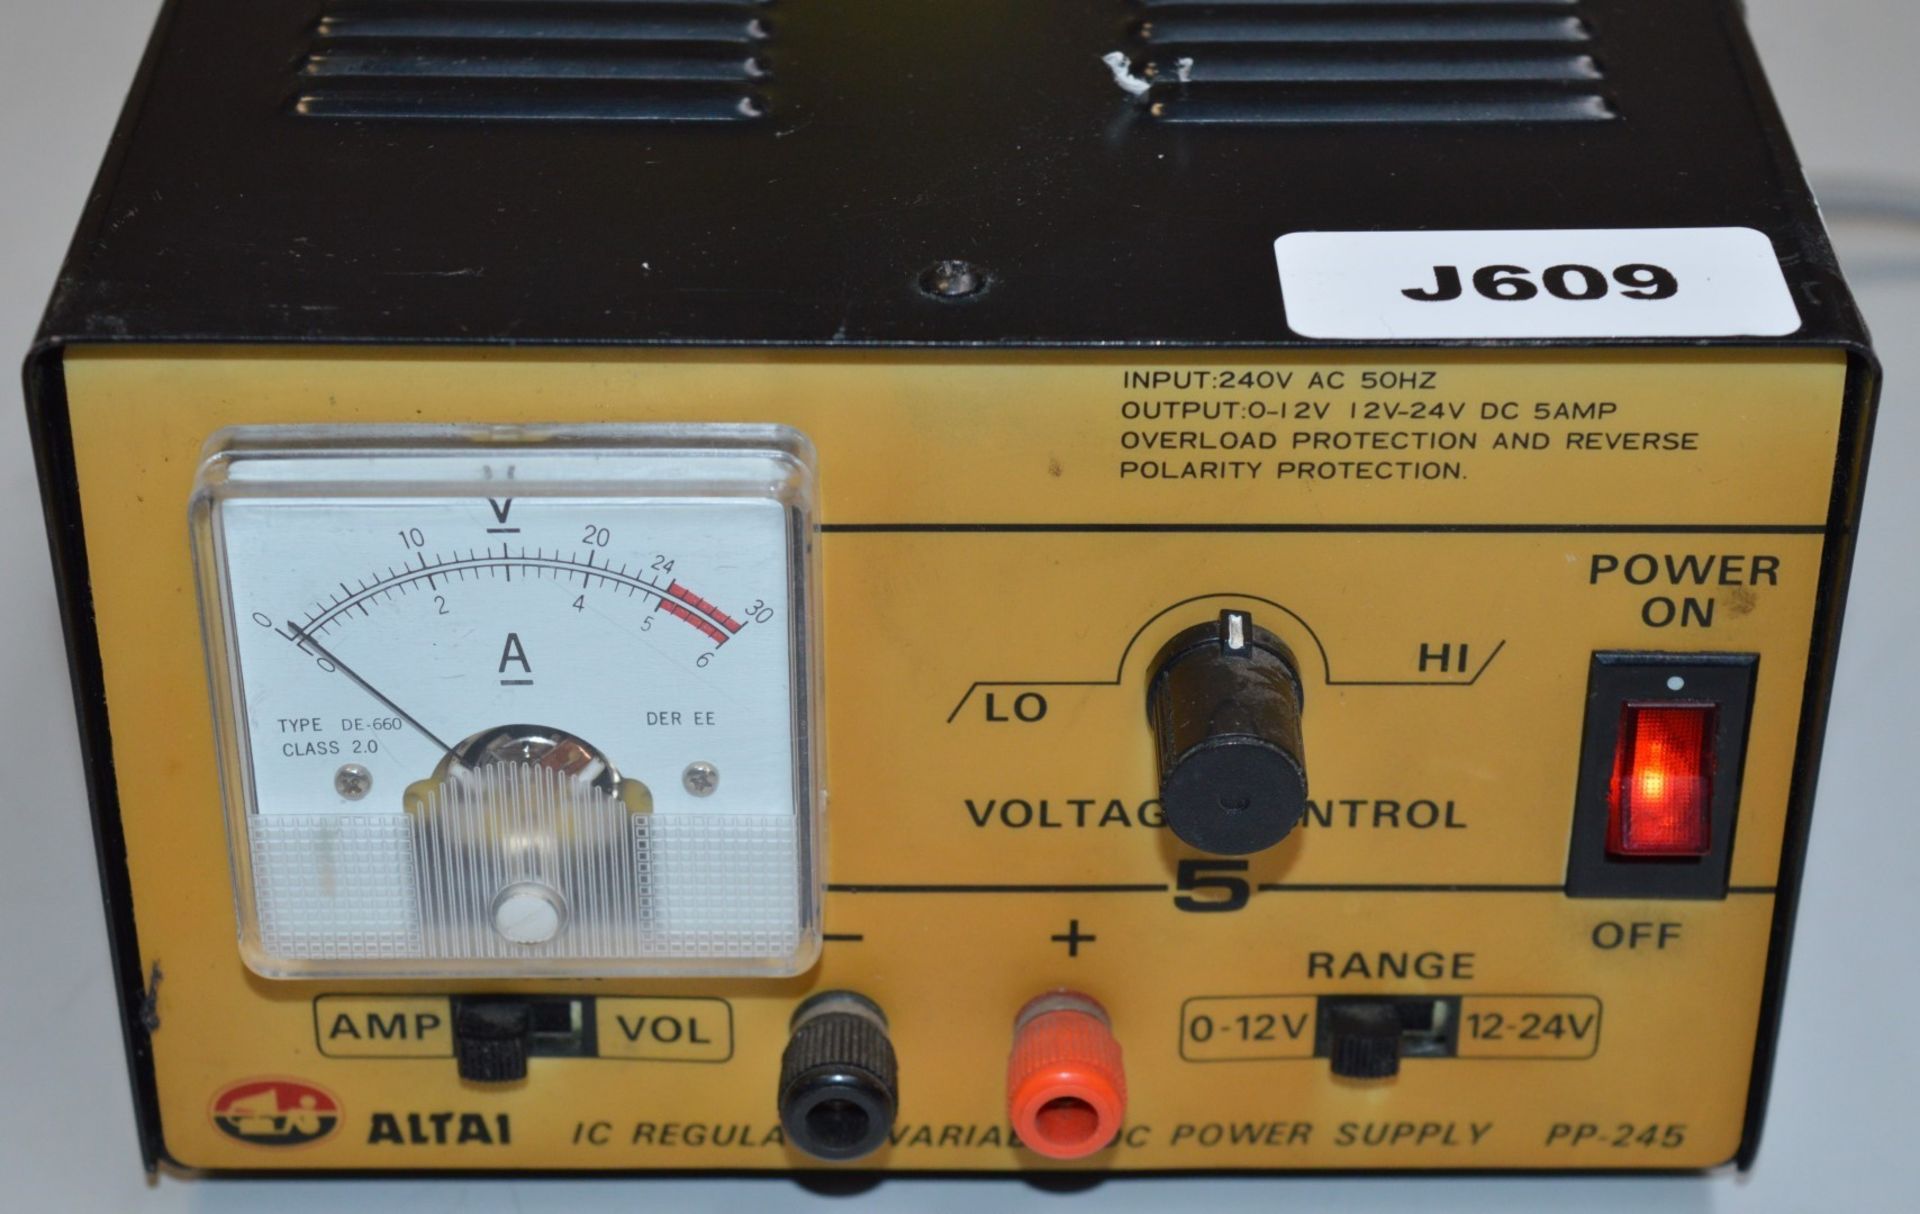 1 x Altai IC Regulated Variable Power Supply - Model PP-245 - Vintage Test Equipment - CL011 - Ref - Image 2 of 5